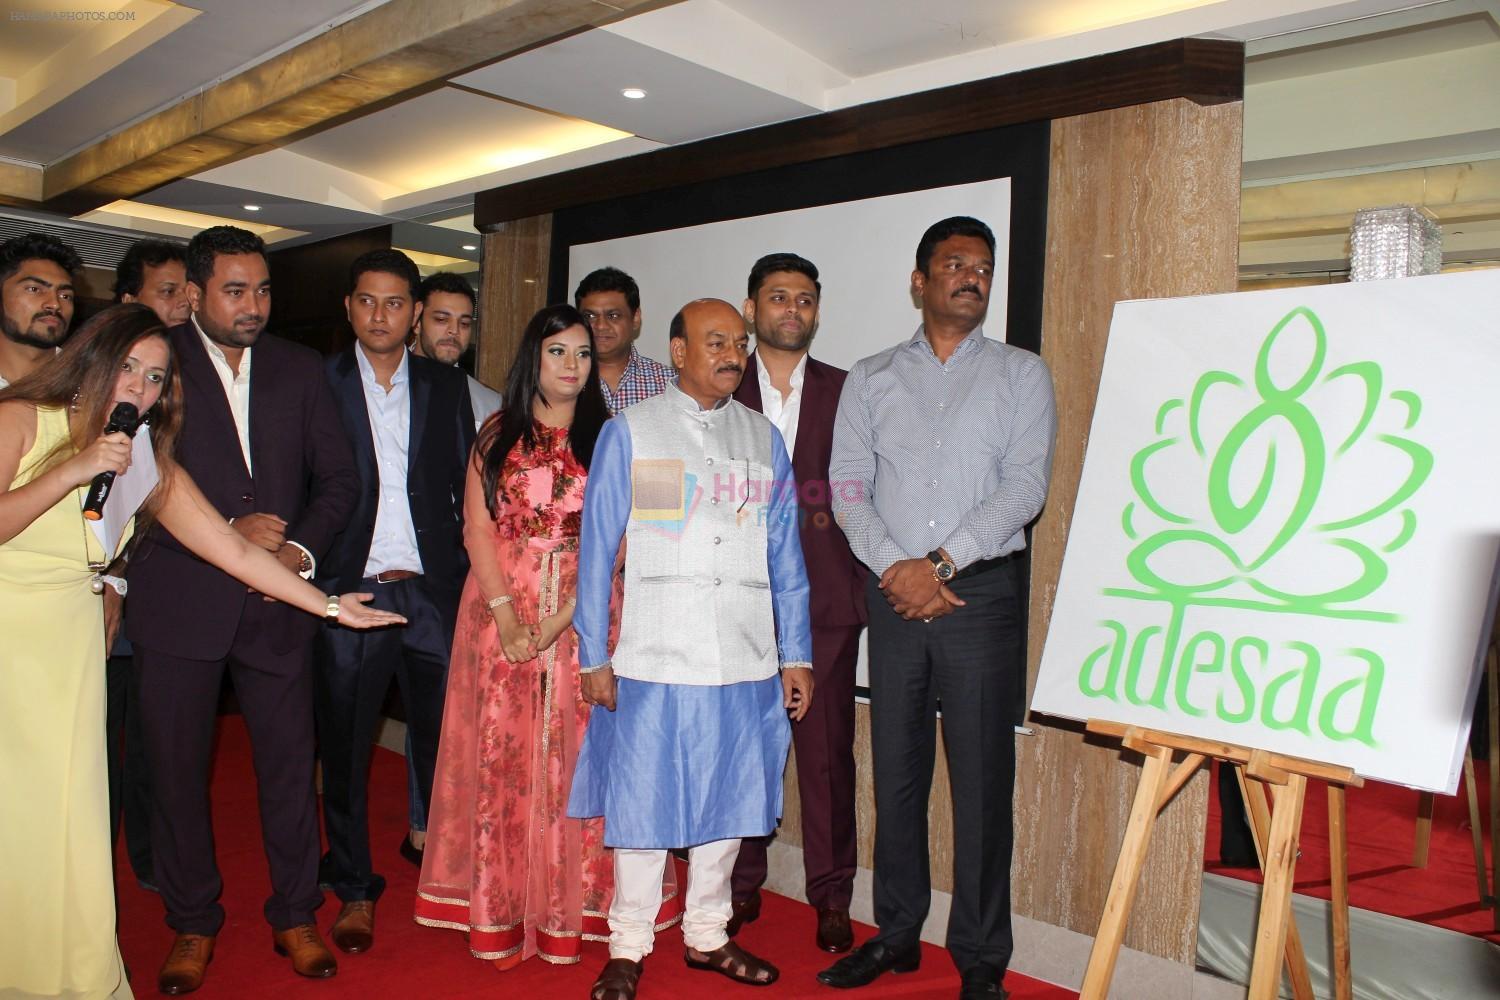 at The Grand Launch Of Adesaa Wellness Concerning Yoga on 19th May 2017